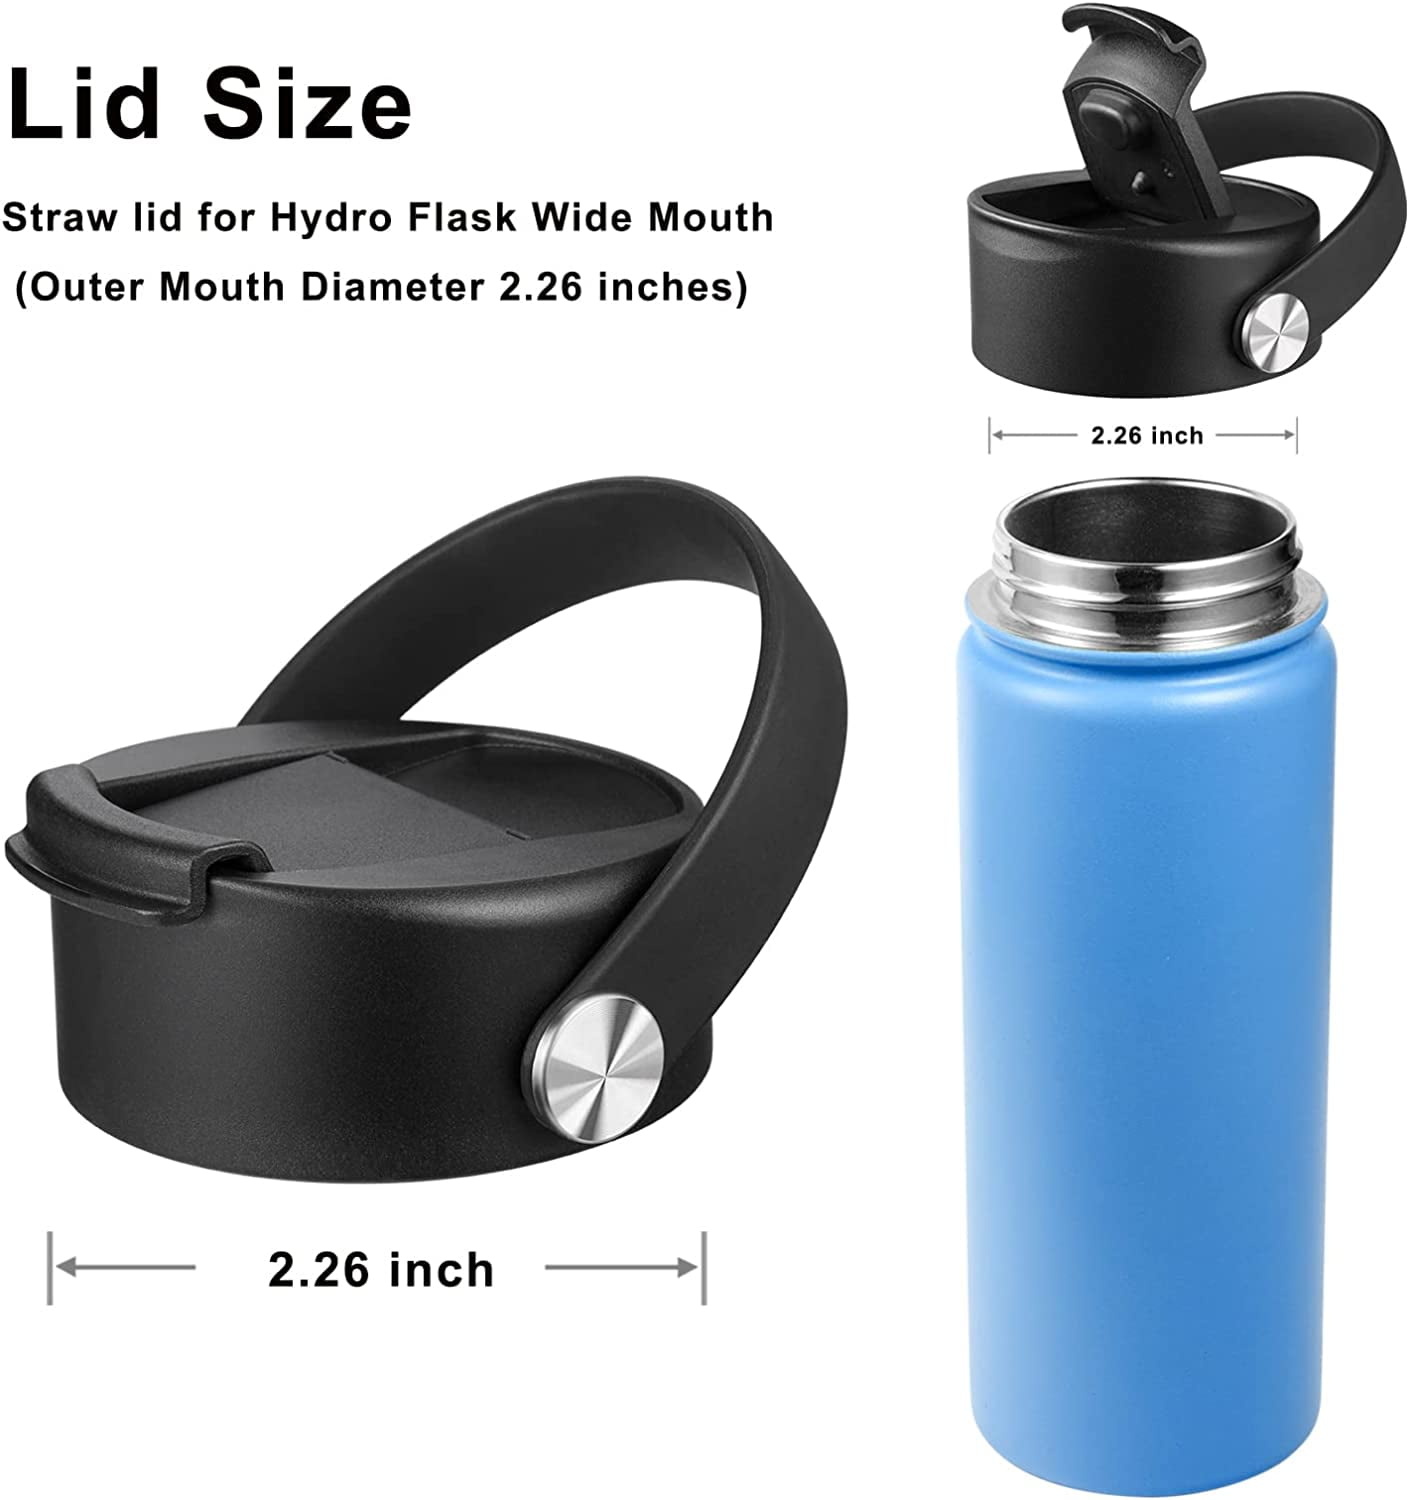 24ct. Custom Hydro Flask White Wide Mouth with Flex Sip Lid 20oz. by Corporate Gear